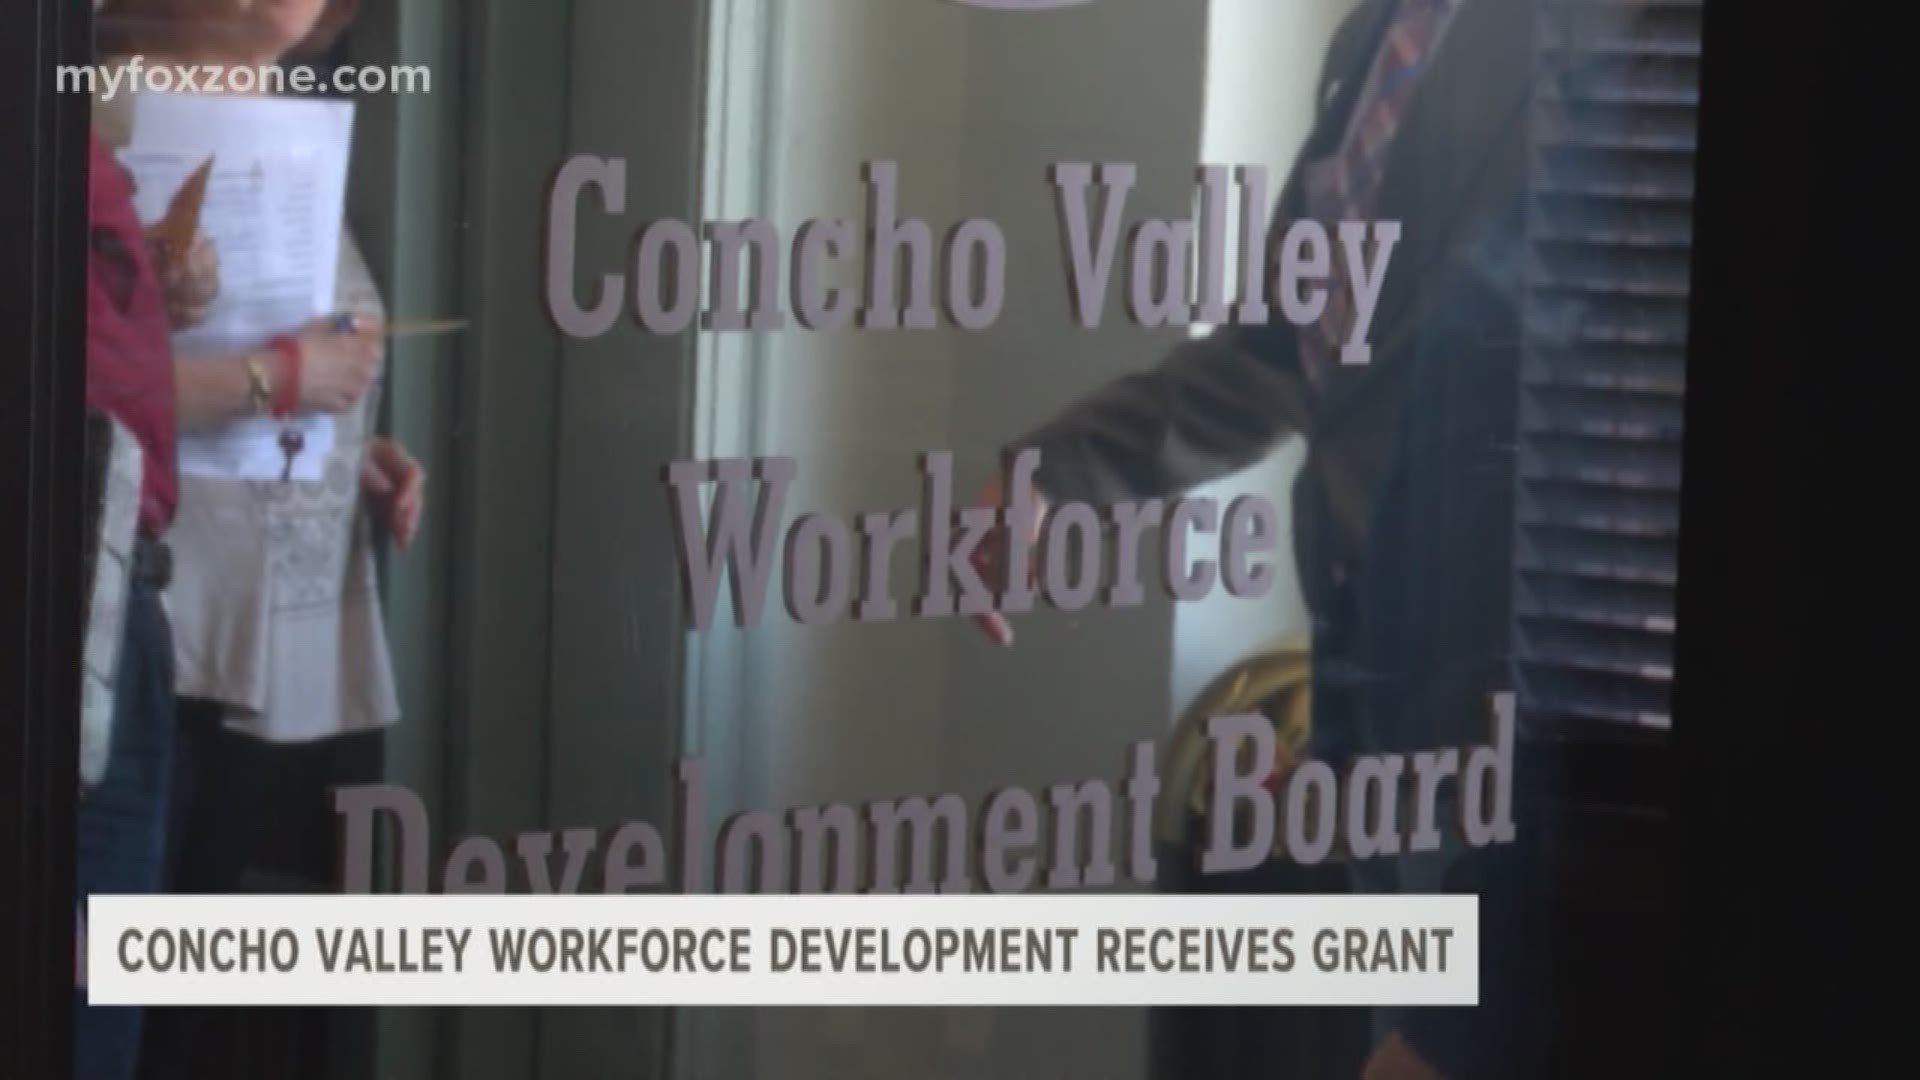 Concho Valley Workforce receives grant.